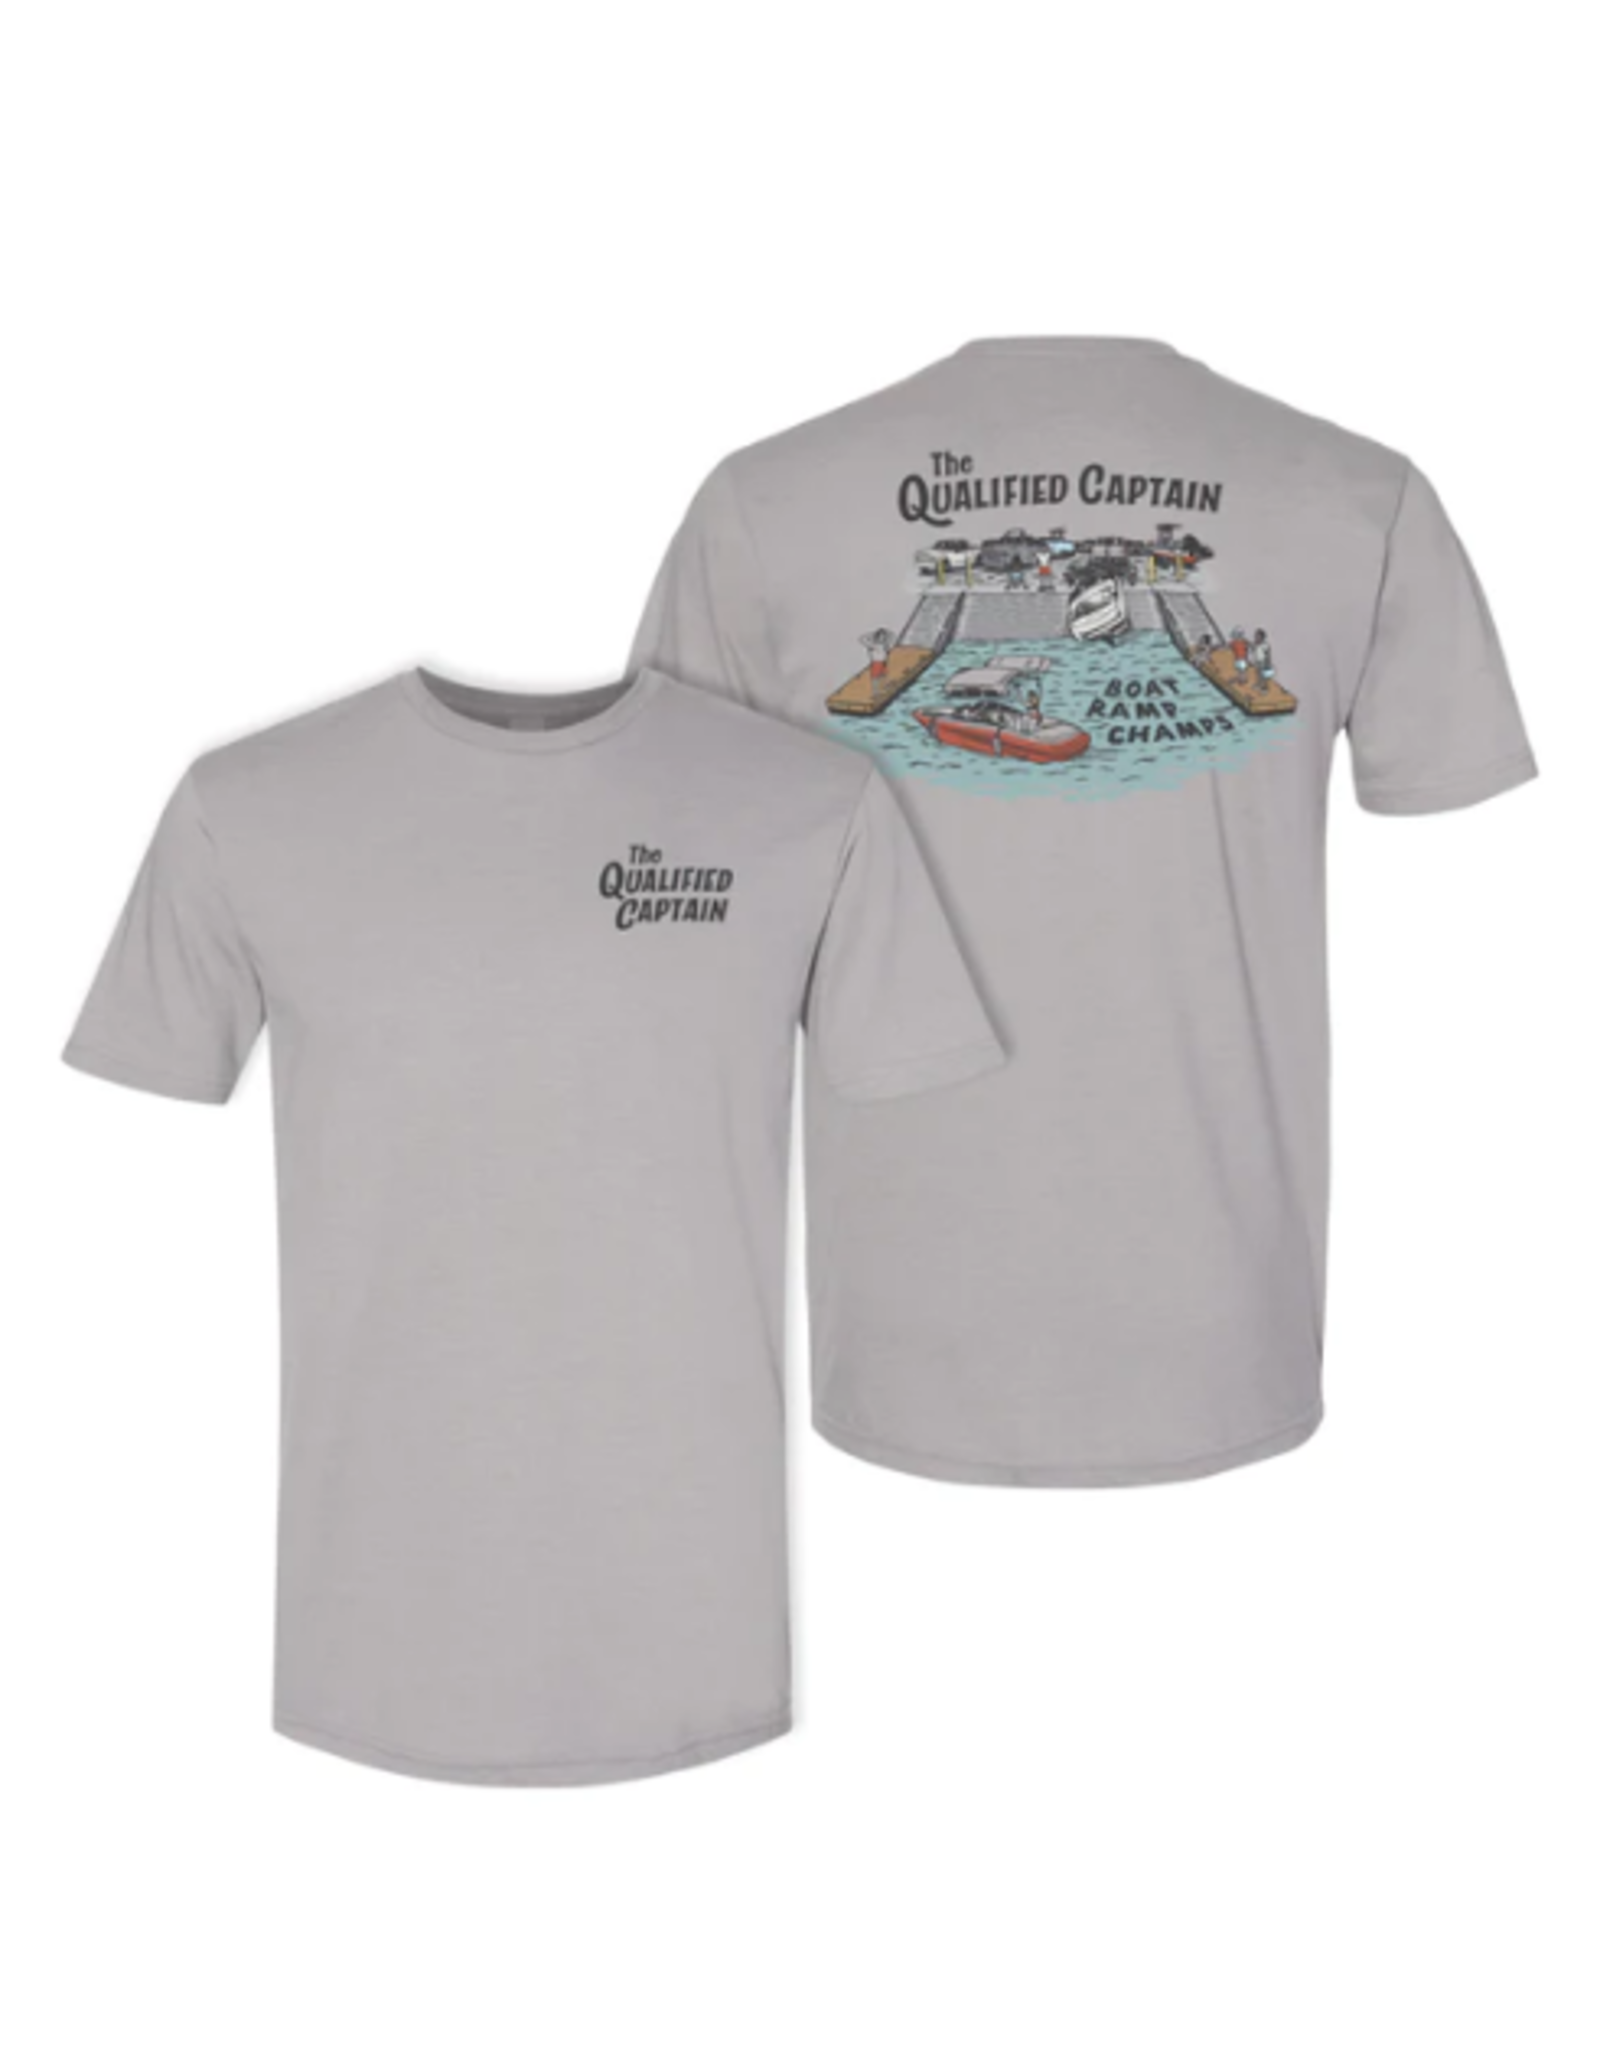 The Qualified Captain BOAT RAMP CHAMP TEE